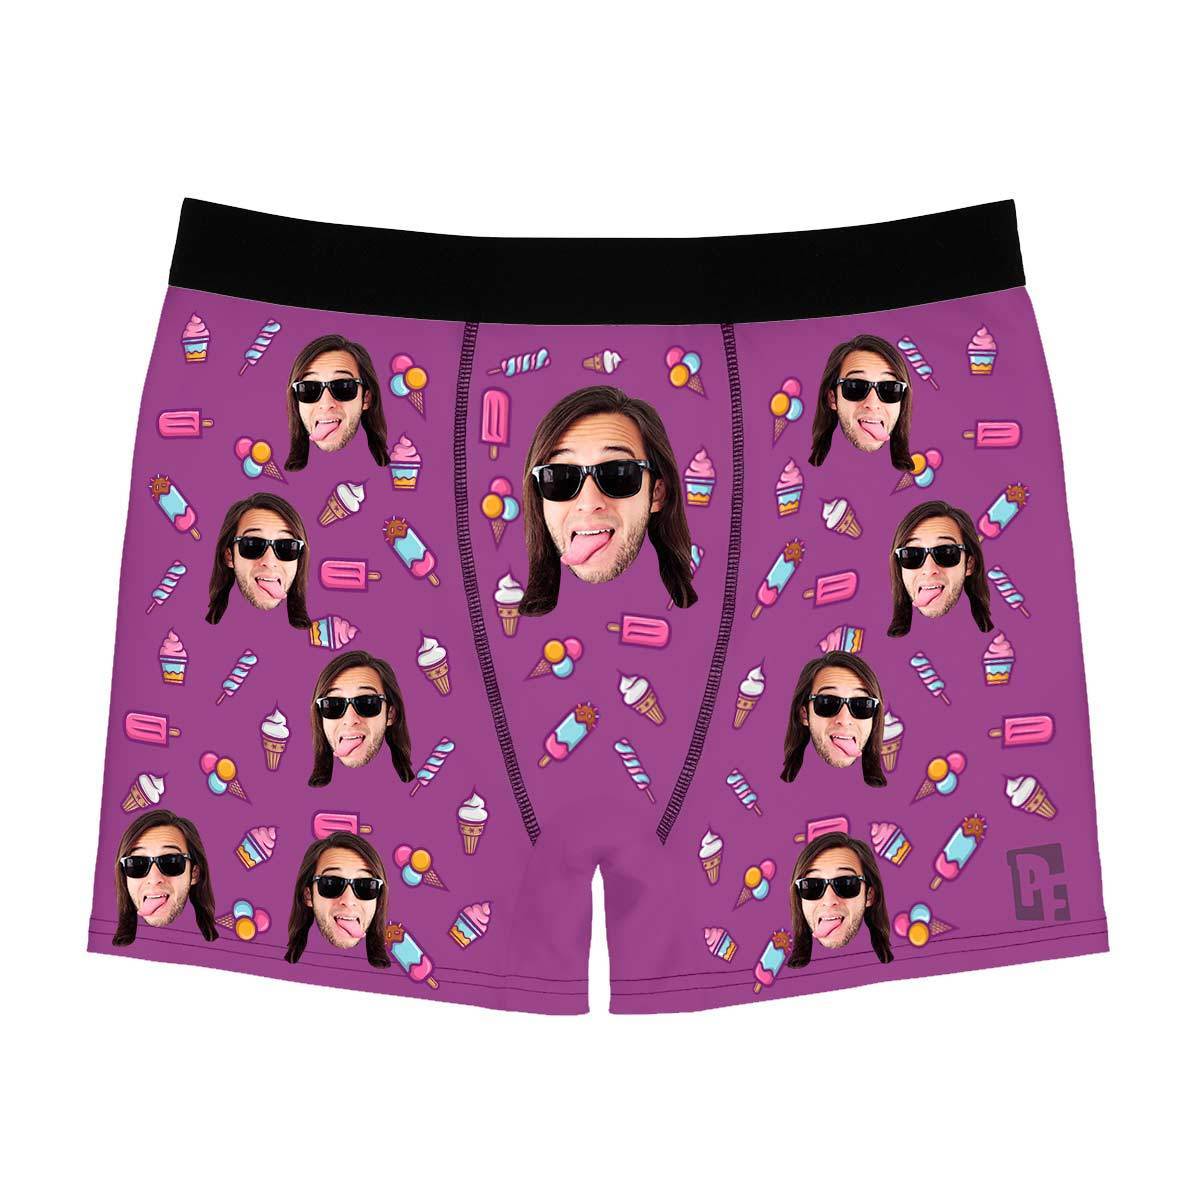 Purple Candies men's boxer briefs personalized with photo printed on them